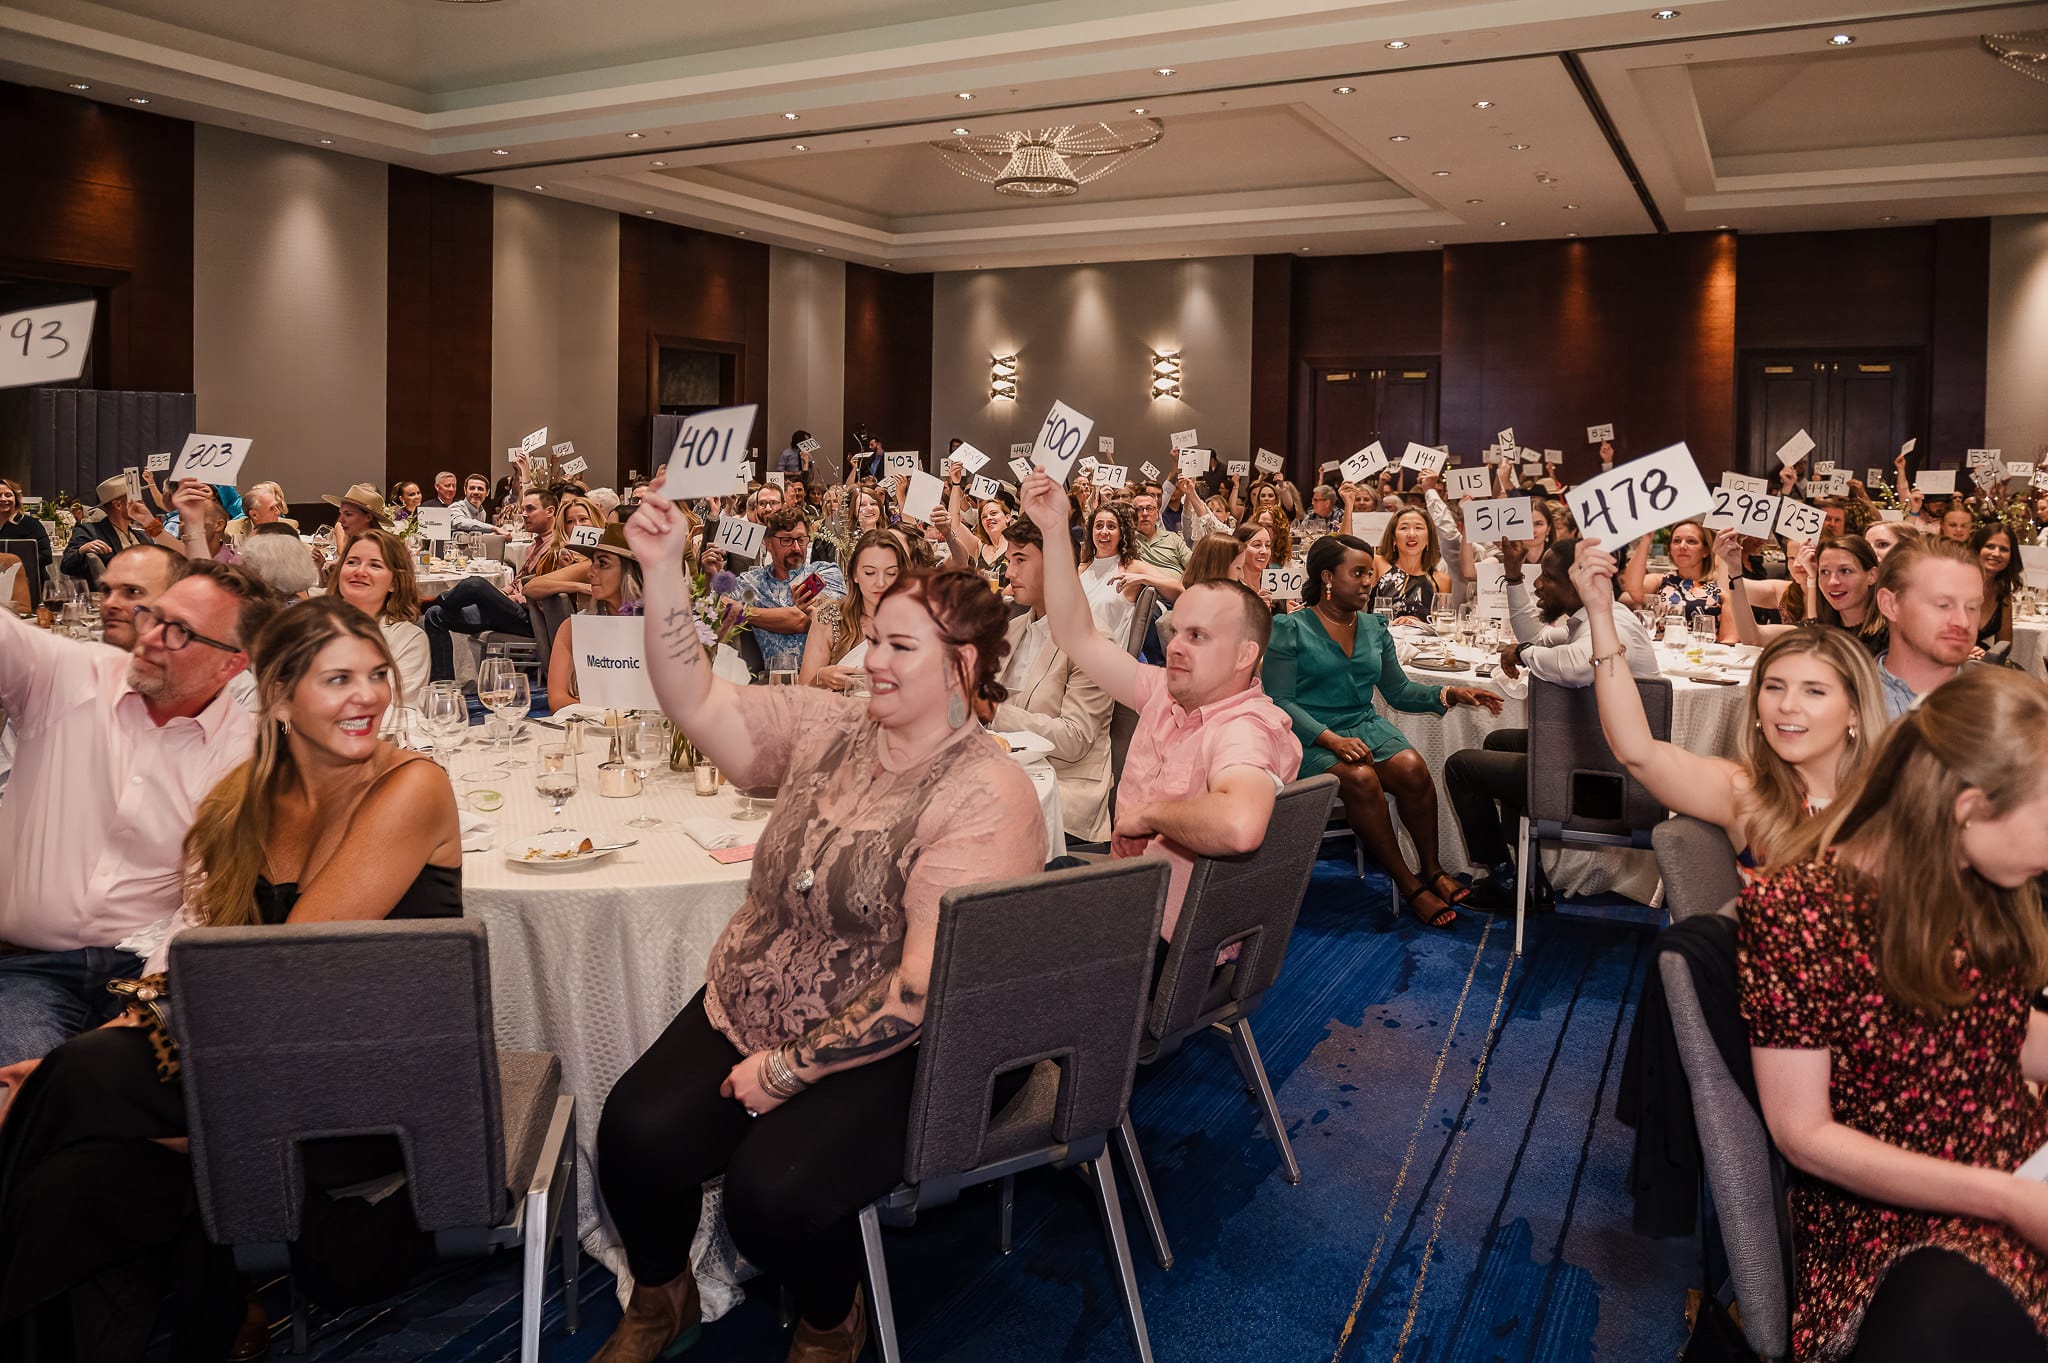 A wide view of people holding up their bidding numbers during a charity fundraiser.